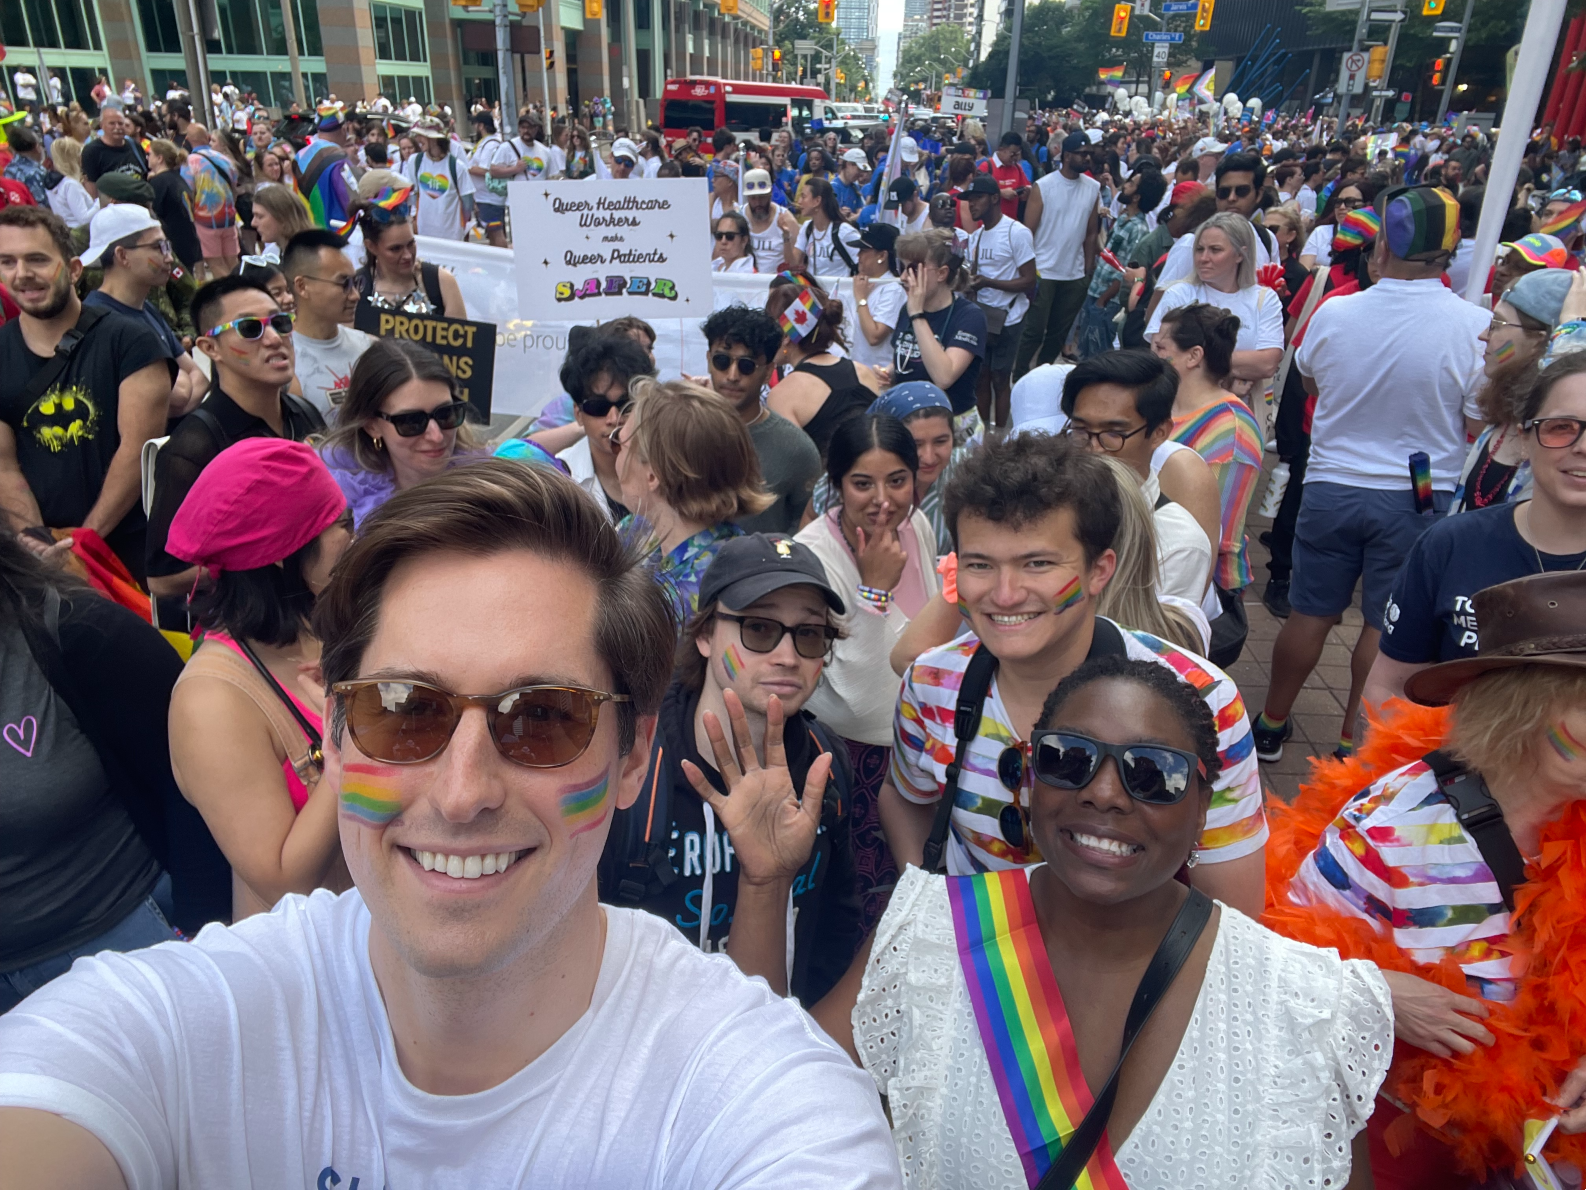 OMA President Dr. Dominik Nowak and President-elect Dr. Zainab Abdurrahman smile in a selfie with a large crowd behind them in a downtown Toronto street.